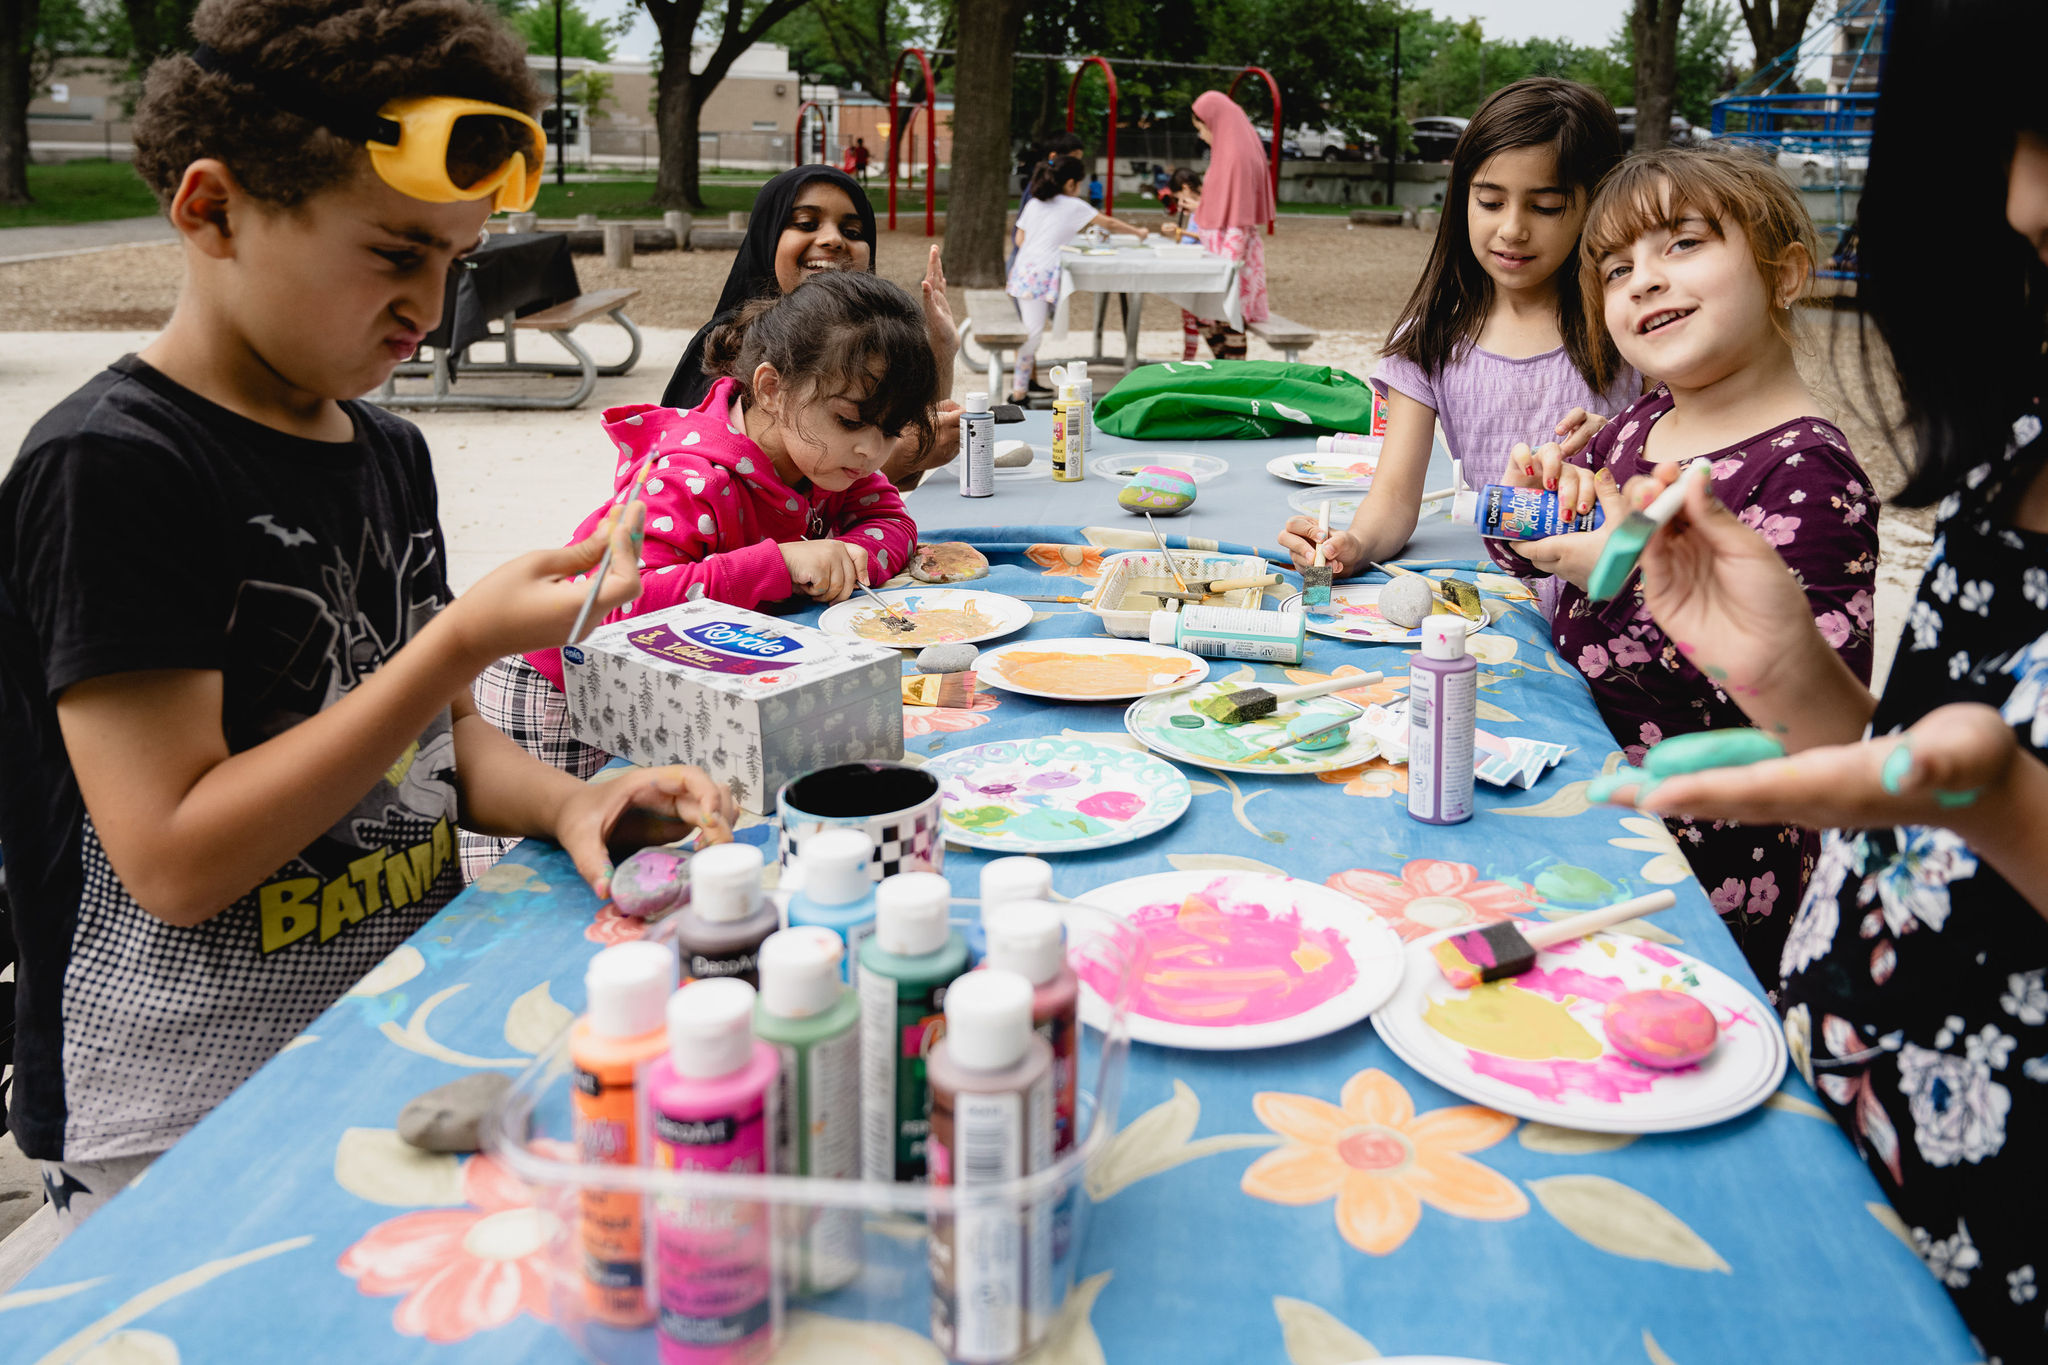 Kids paint at a picnic table in the park.